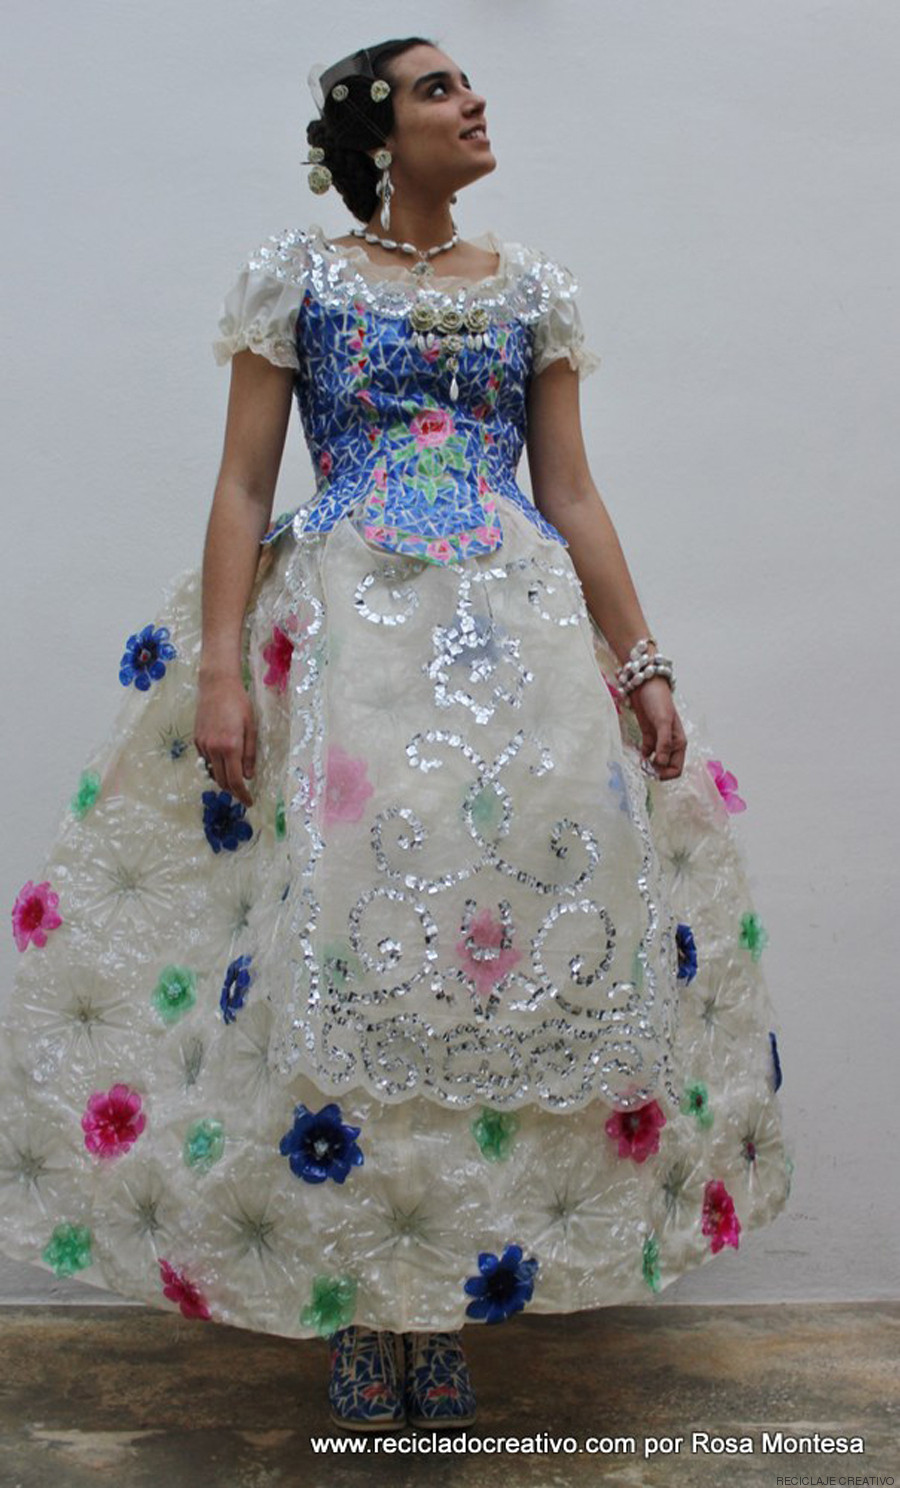 This Recycled Dress Is Made Of 180 Plastic Bottles (PHOTOS)